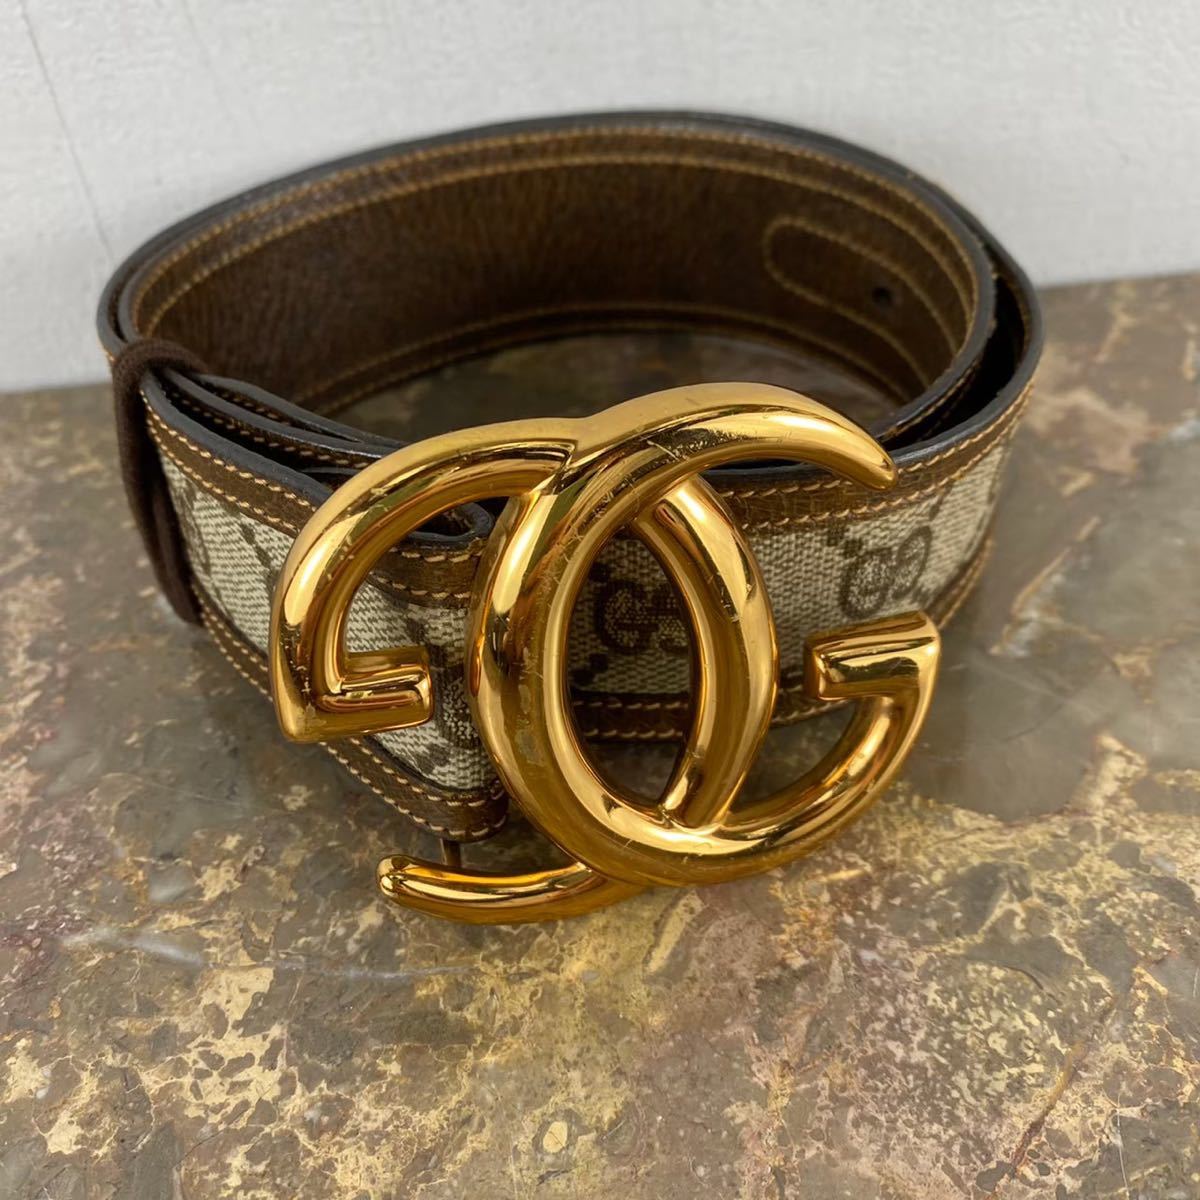 OLD GUCCI GG PATTERNED LOGO BUCKLE BELT MADE IN ITALY/オールドグッチGG柄ロゴバックルベルト_画像2